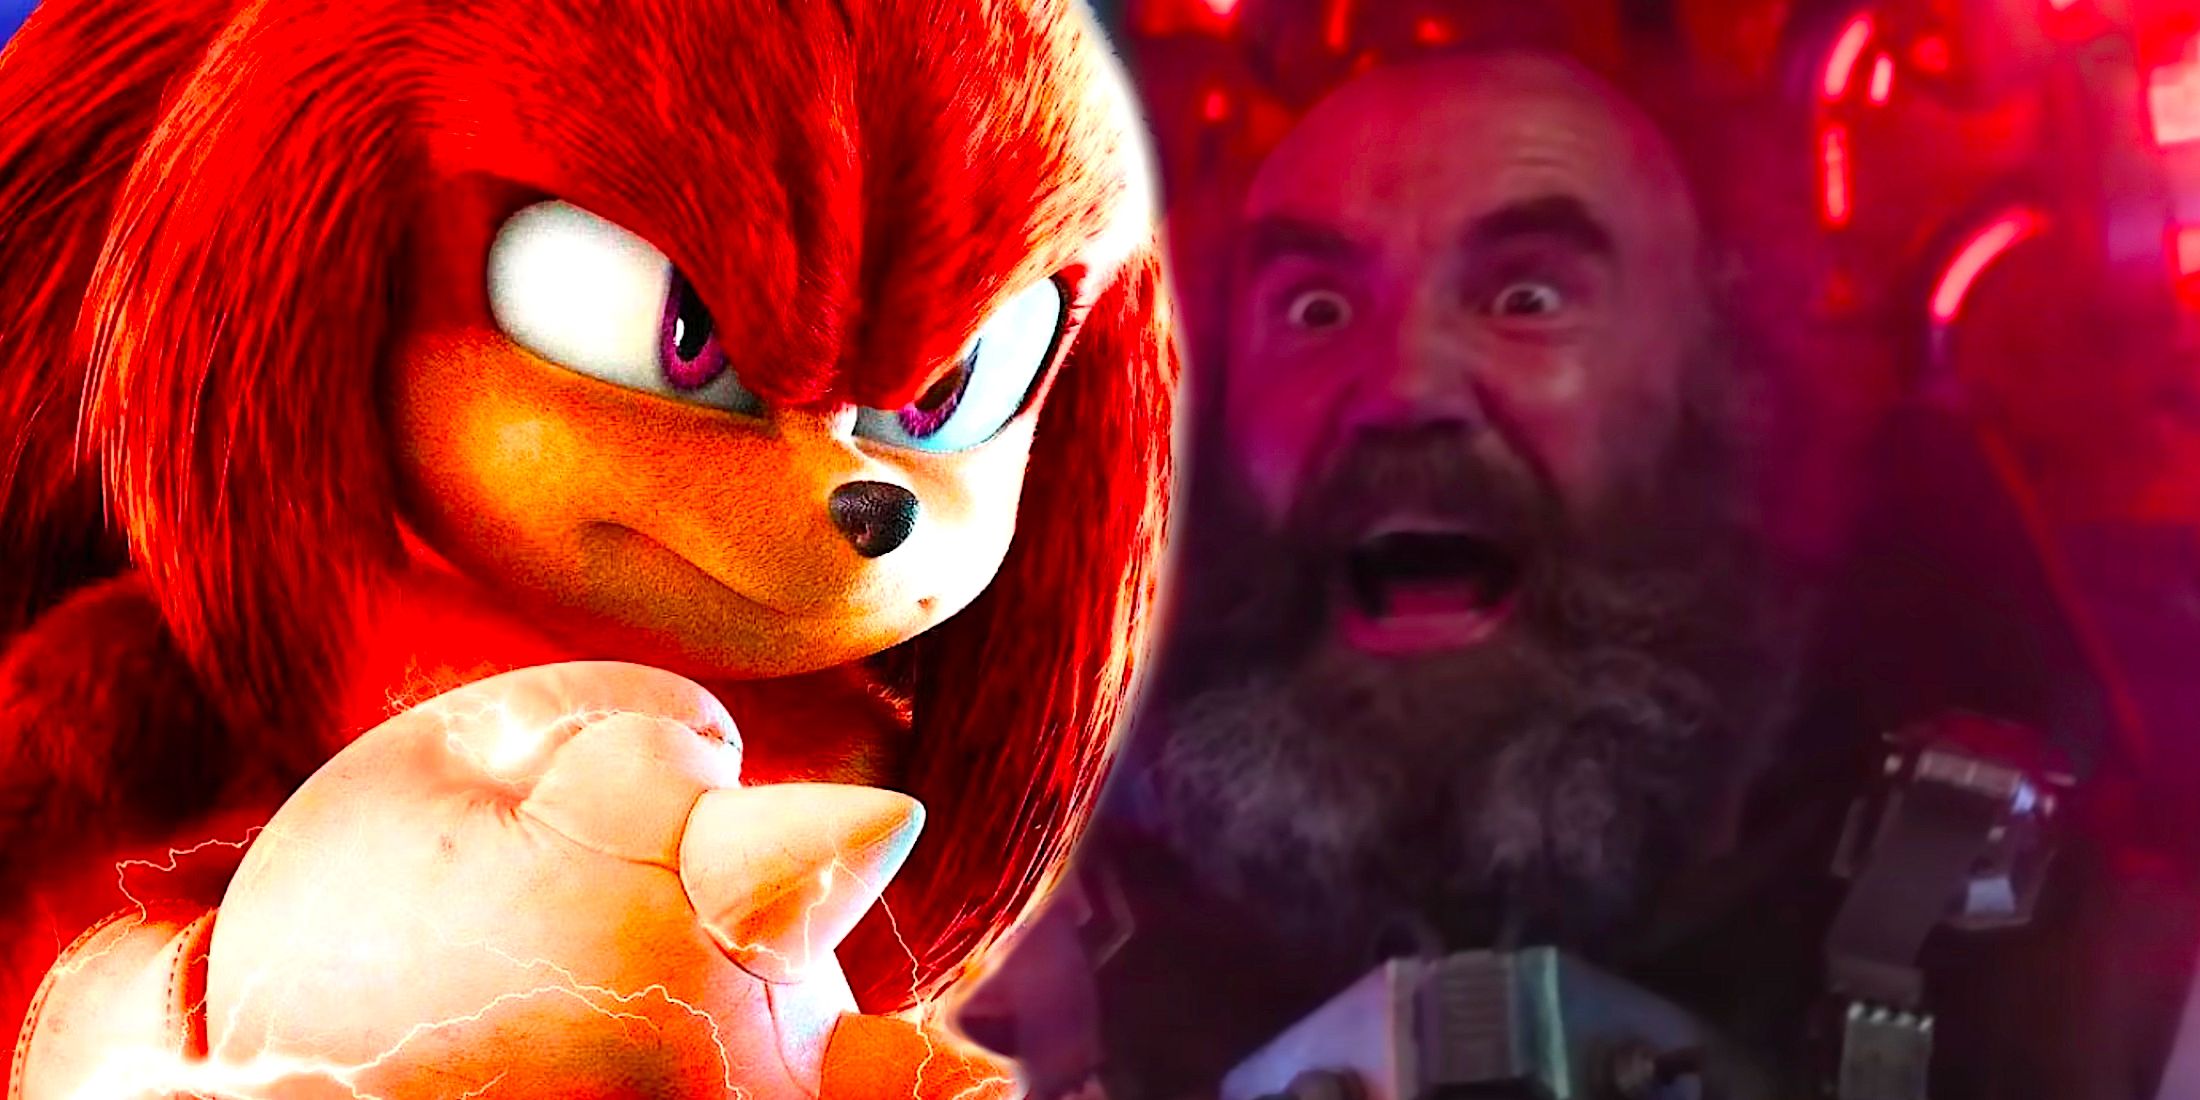 Knuckles looking confident in Sonic the Hedgehog 2 next to the Buyer laughing in Knuckles TV Show